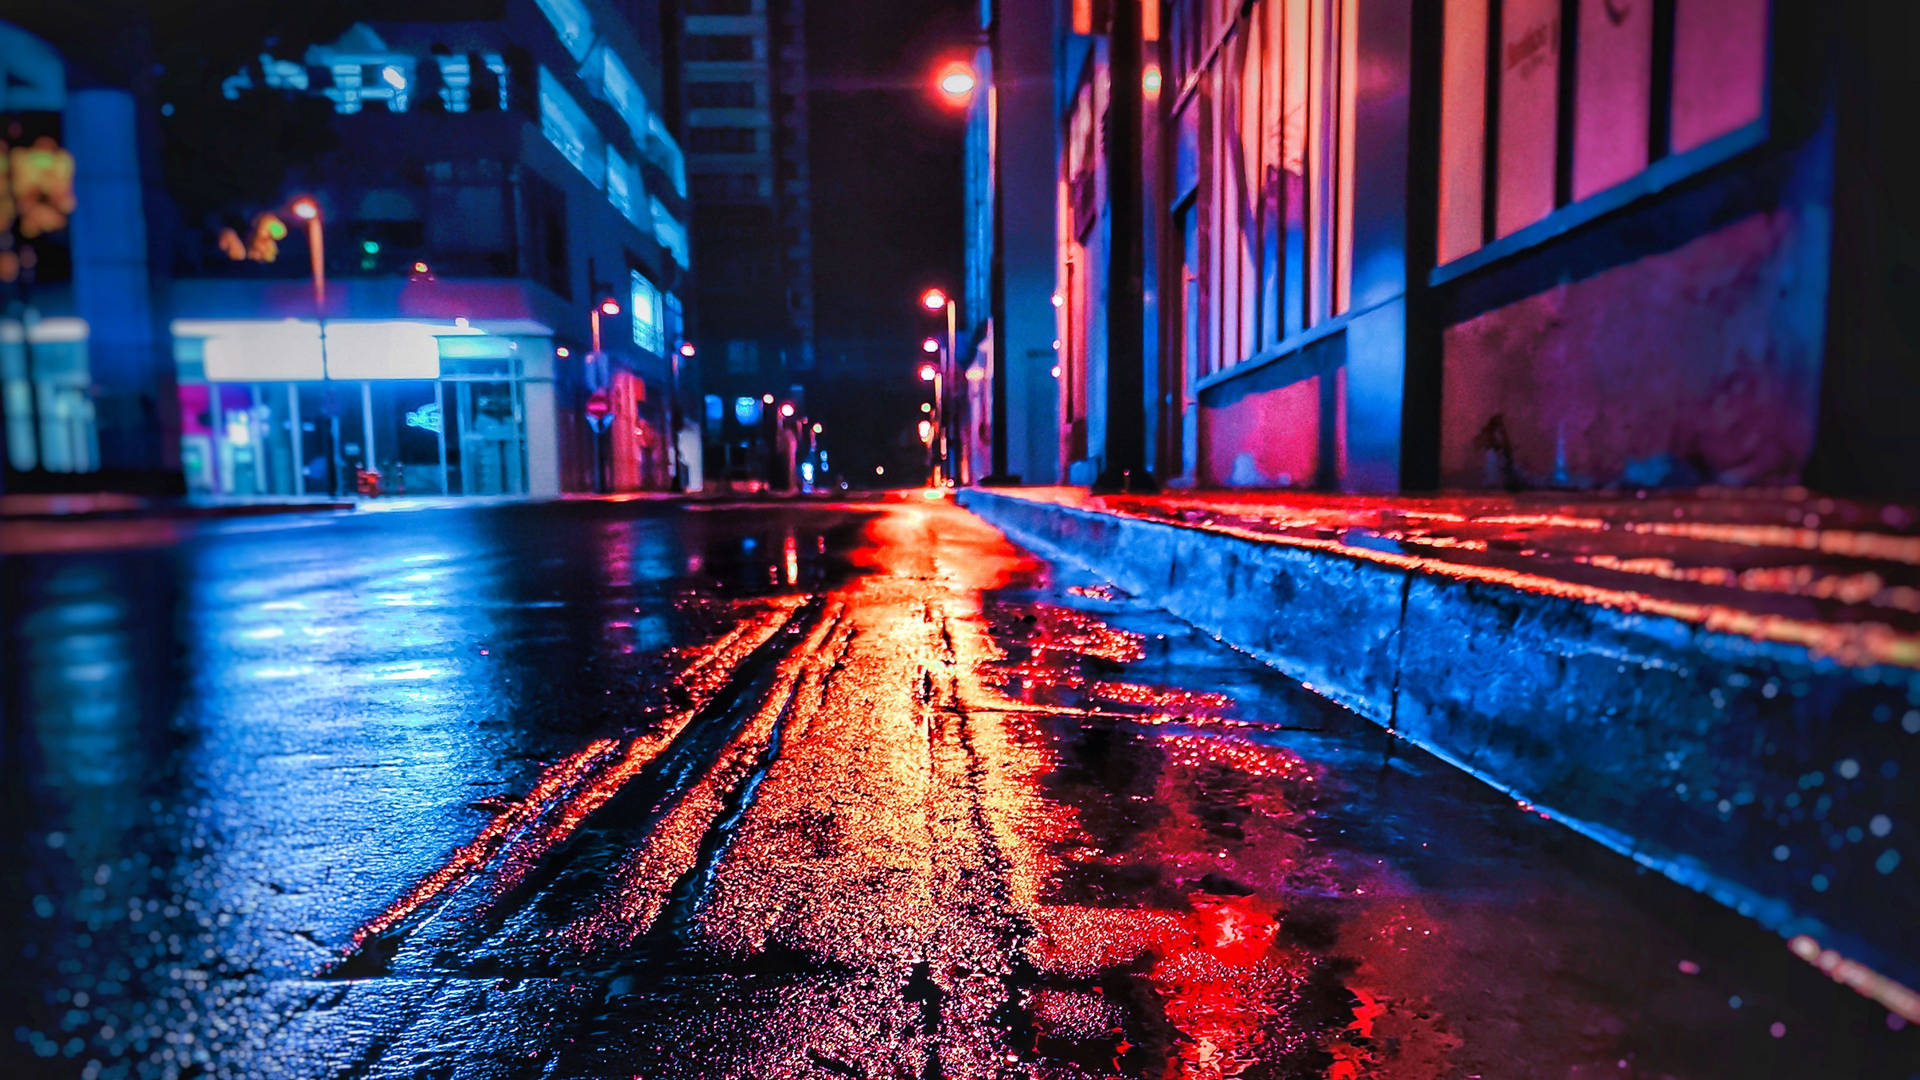 Wet Concrete Road In City At Night Wallpaper